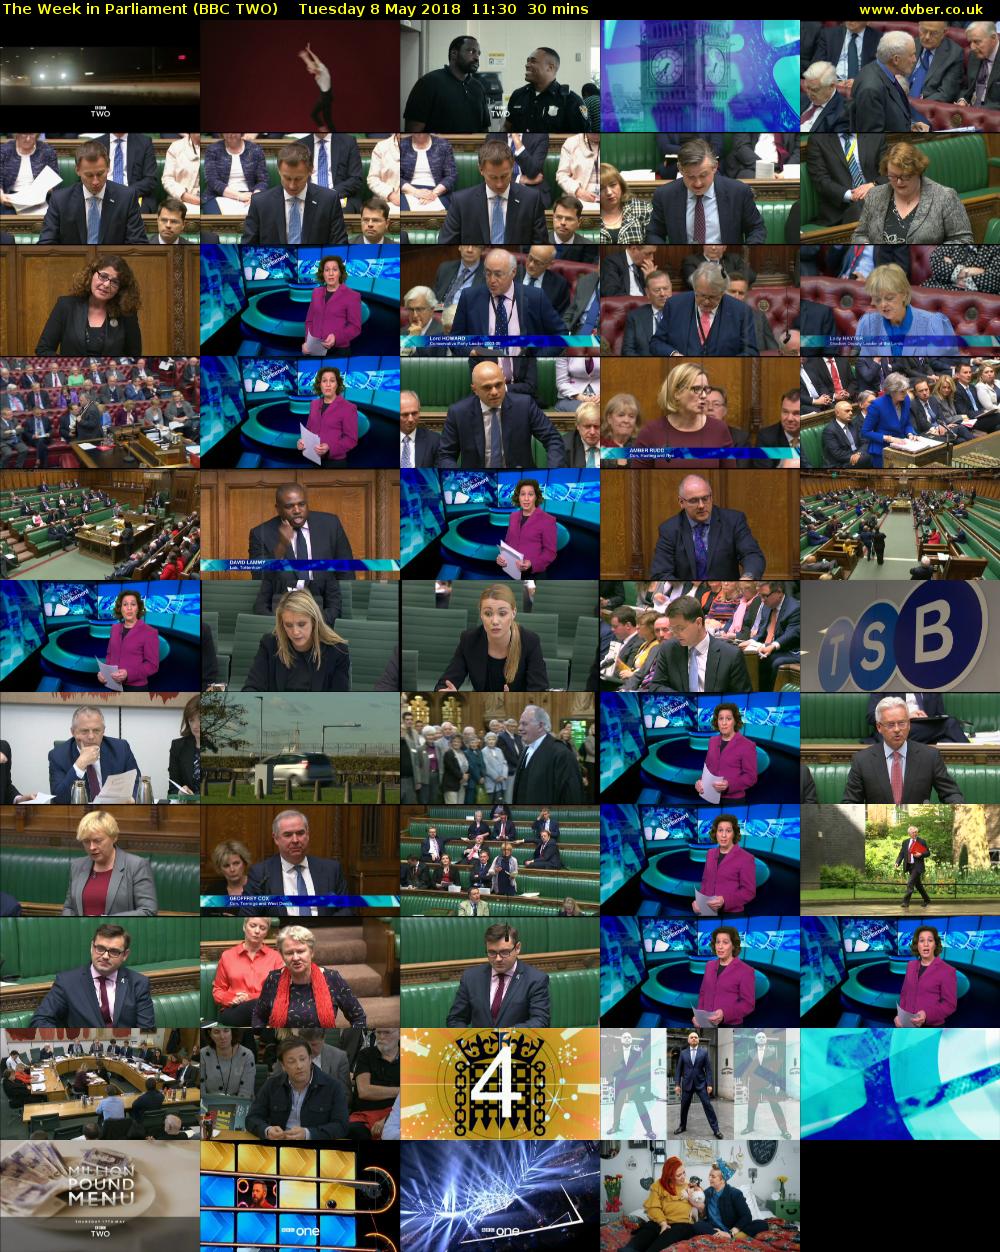 The Week in Parliament (BBC TWO) Tuesday 8 May 2018 11:30 - 12:00